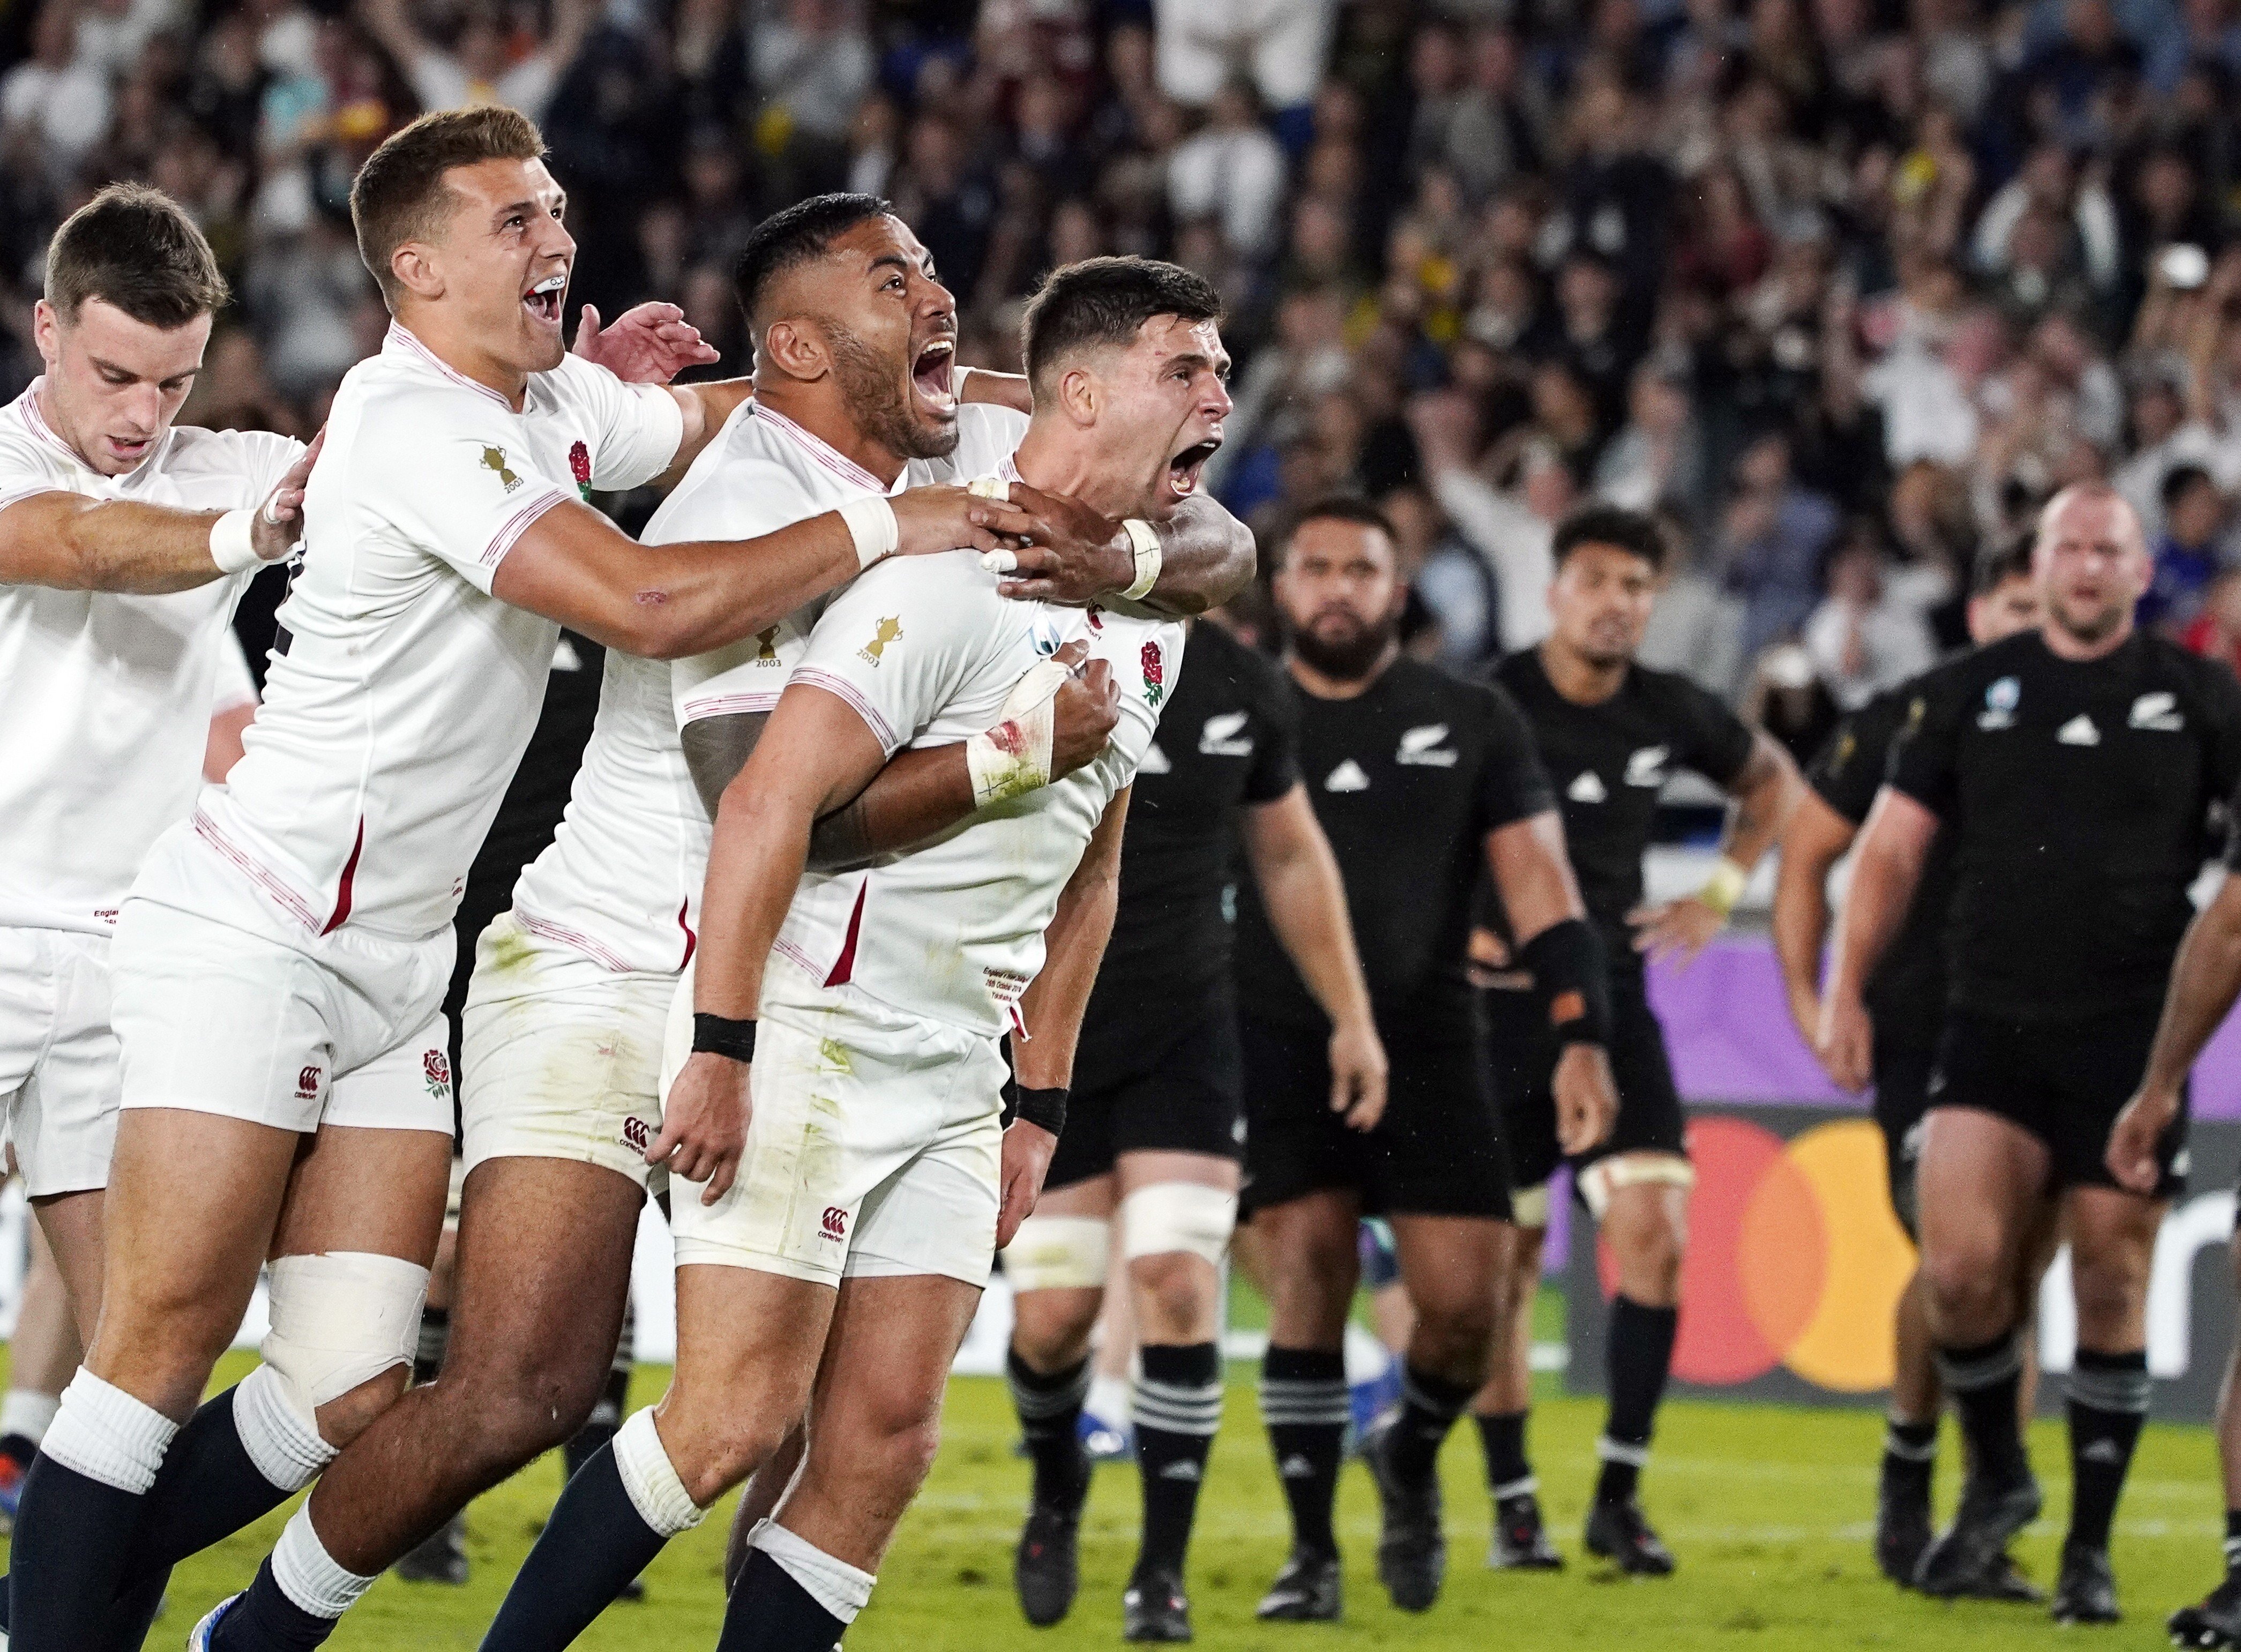 England secured a famous win over the world champions in Japan. Photo: EPA